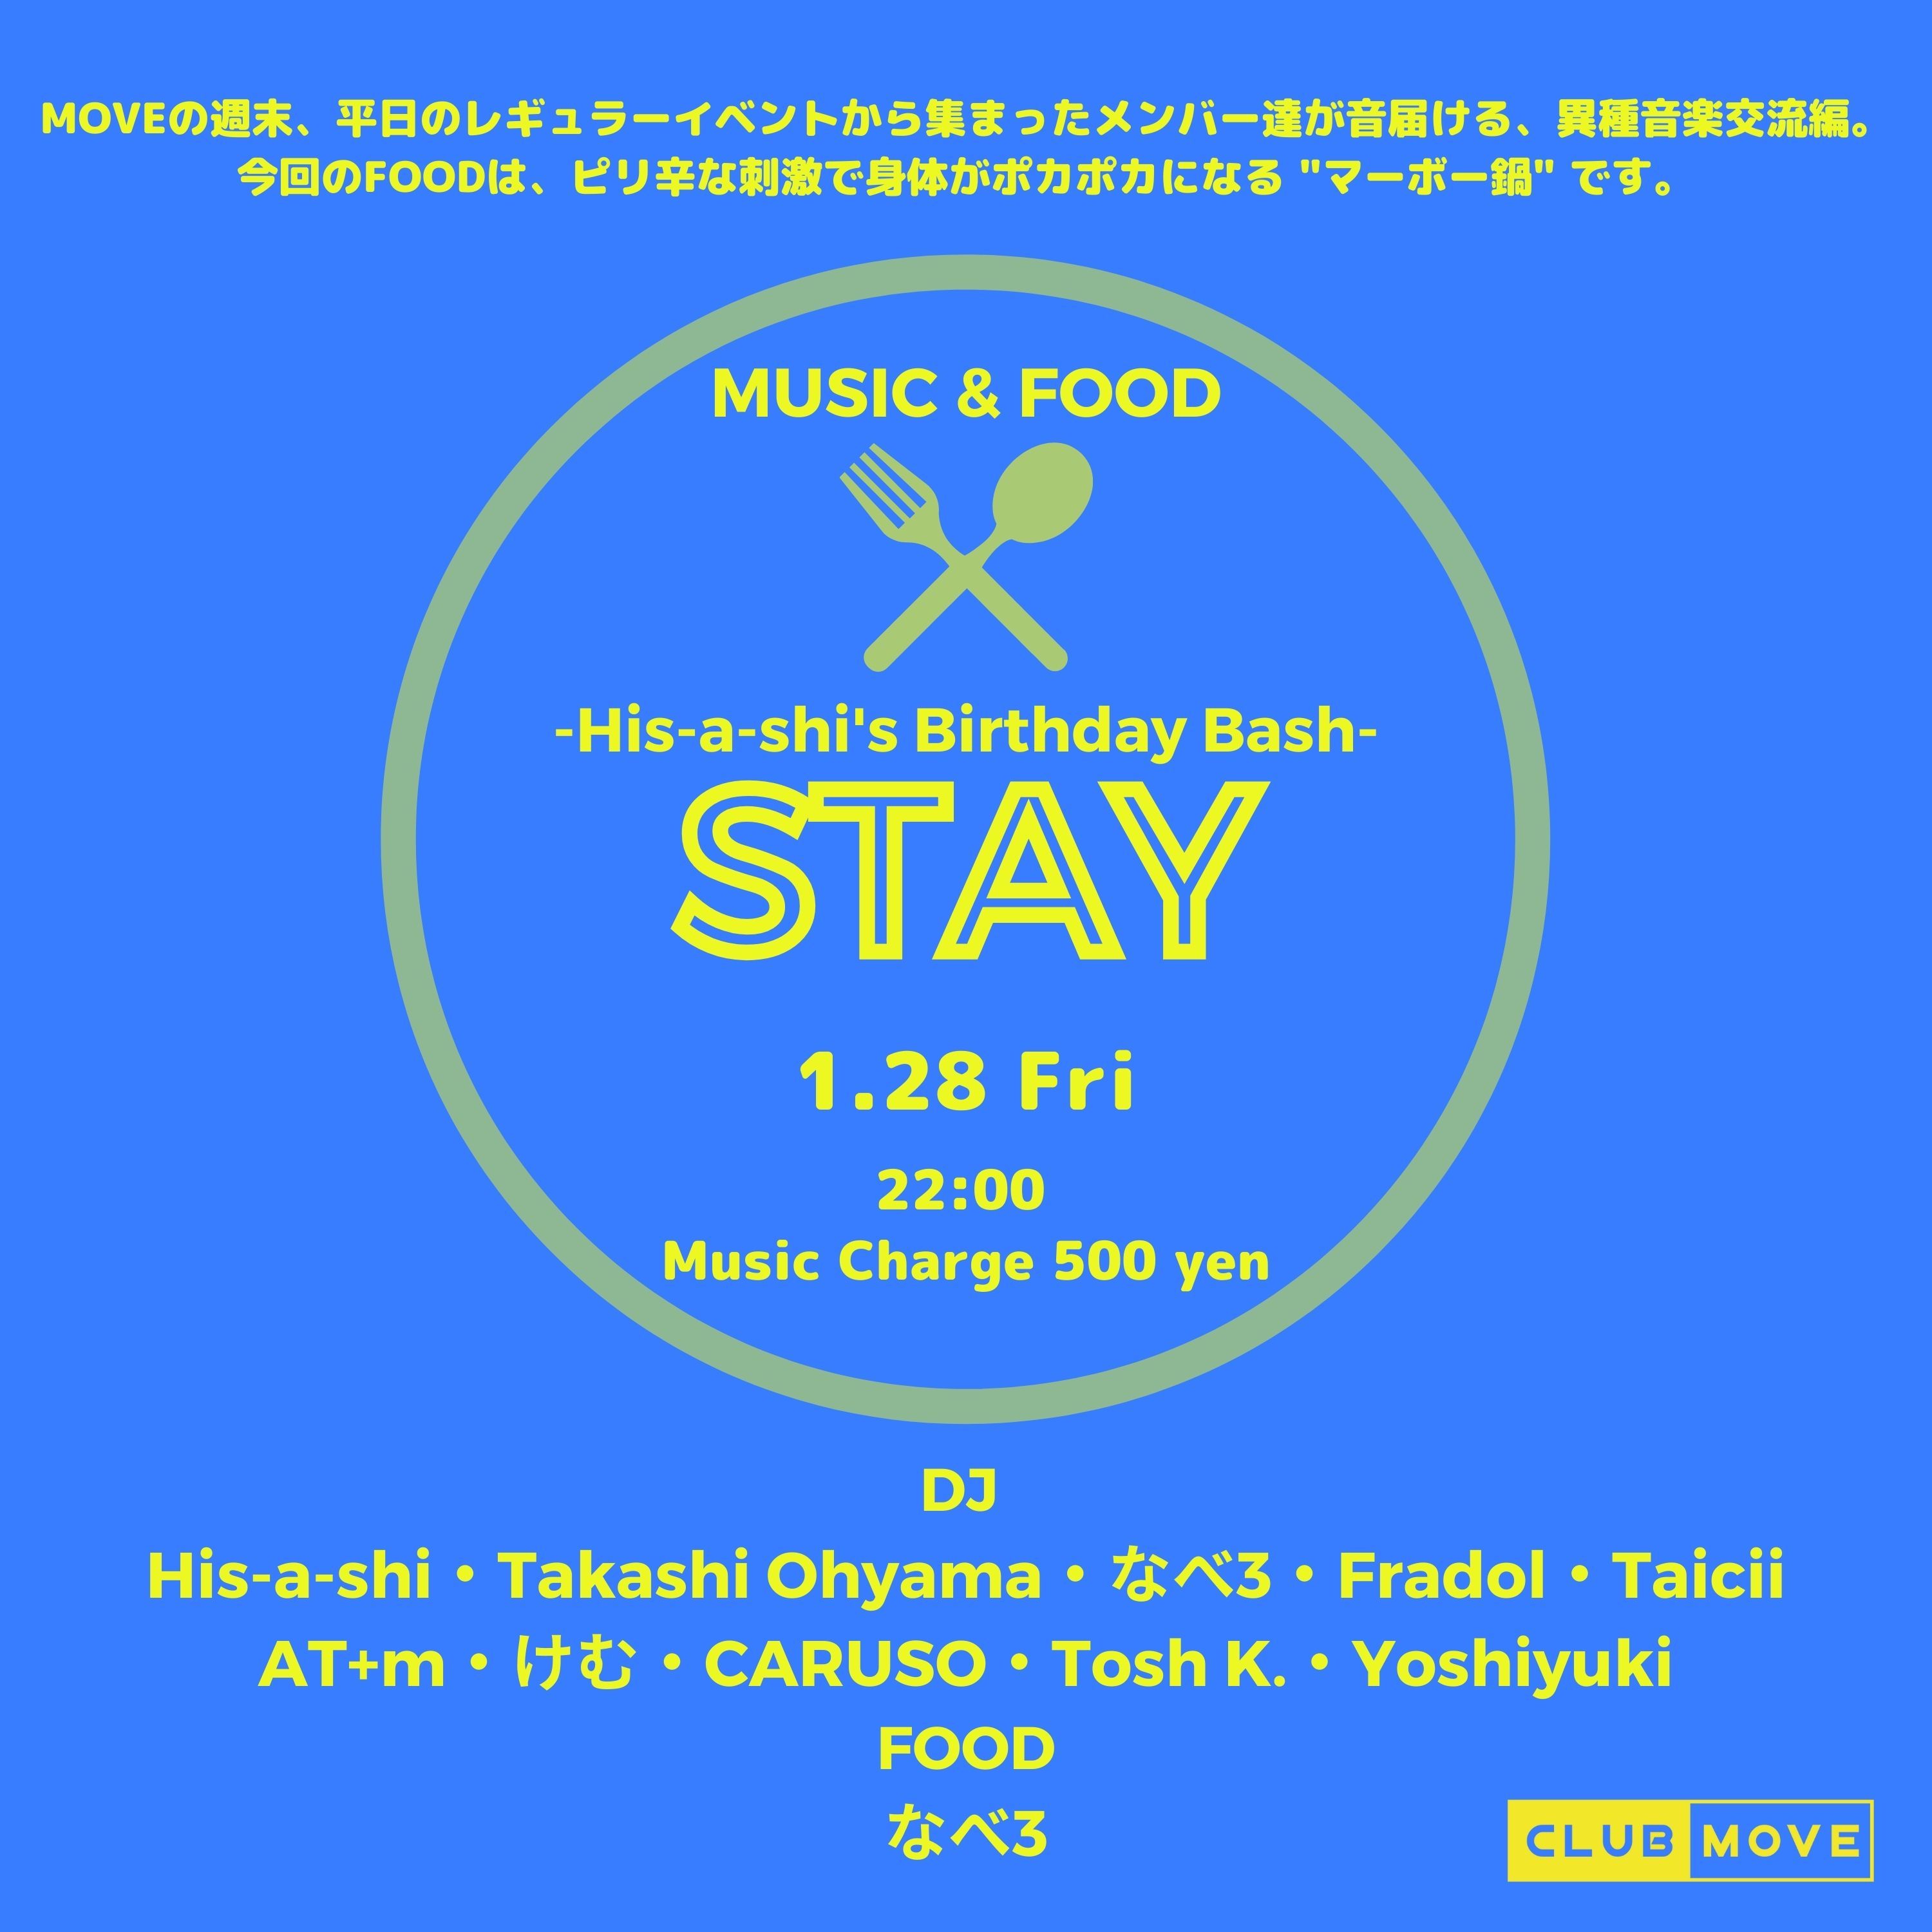 -MUSIC & FOOD- STAY His-a-shi's Birthday Bash